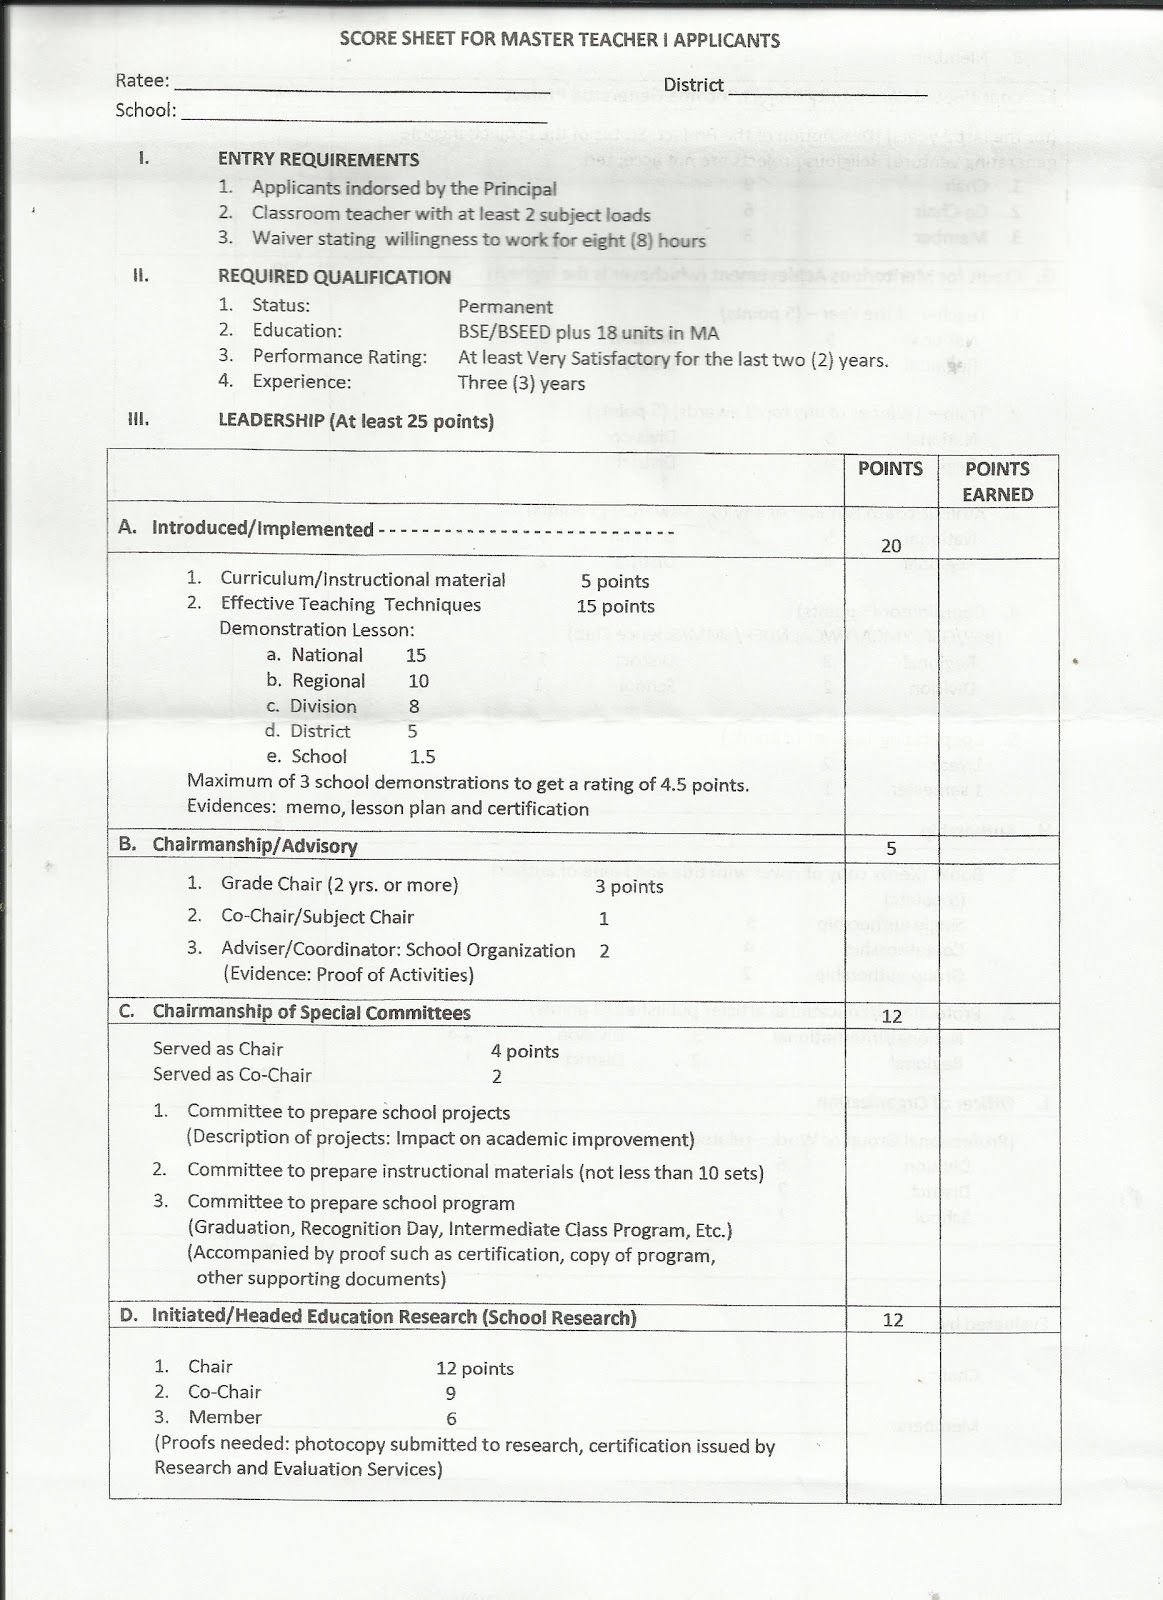 department-of-education-manila-score-sheets-for-master-teacher-i-and